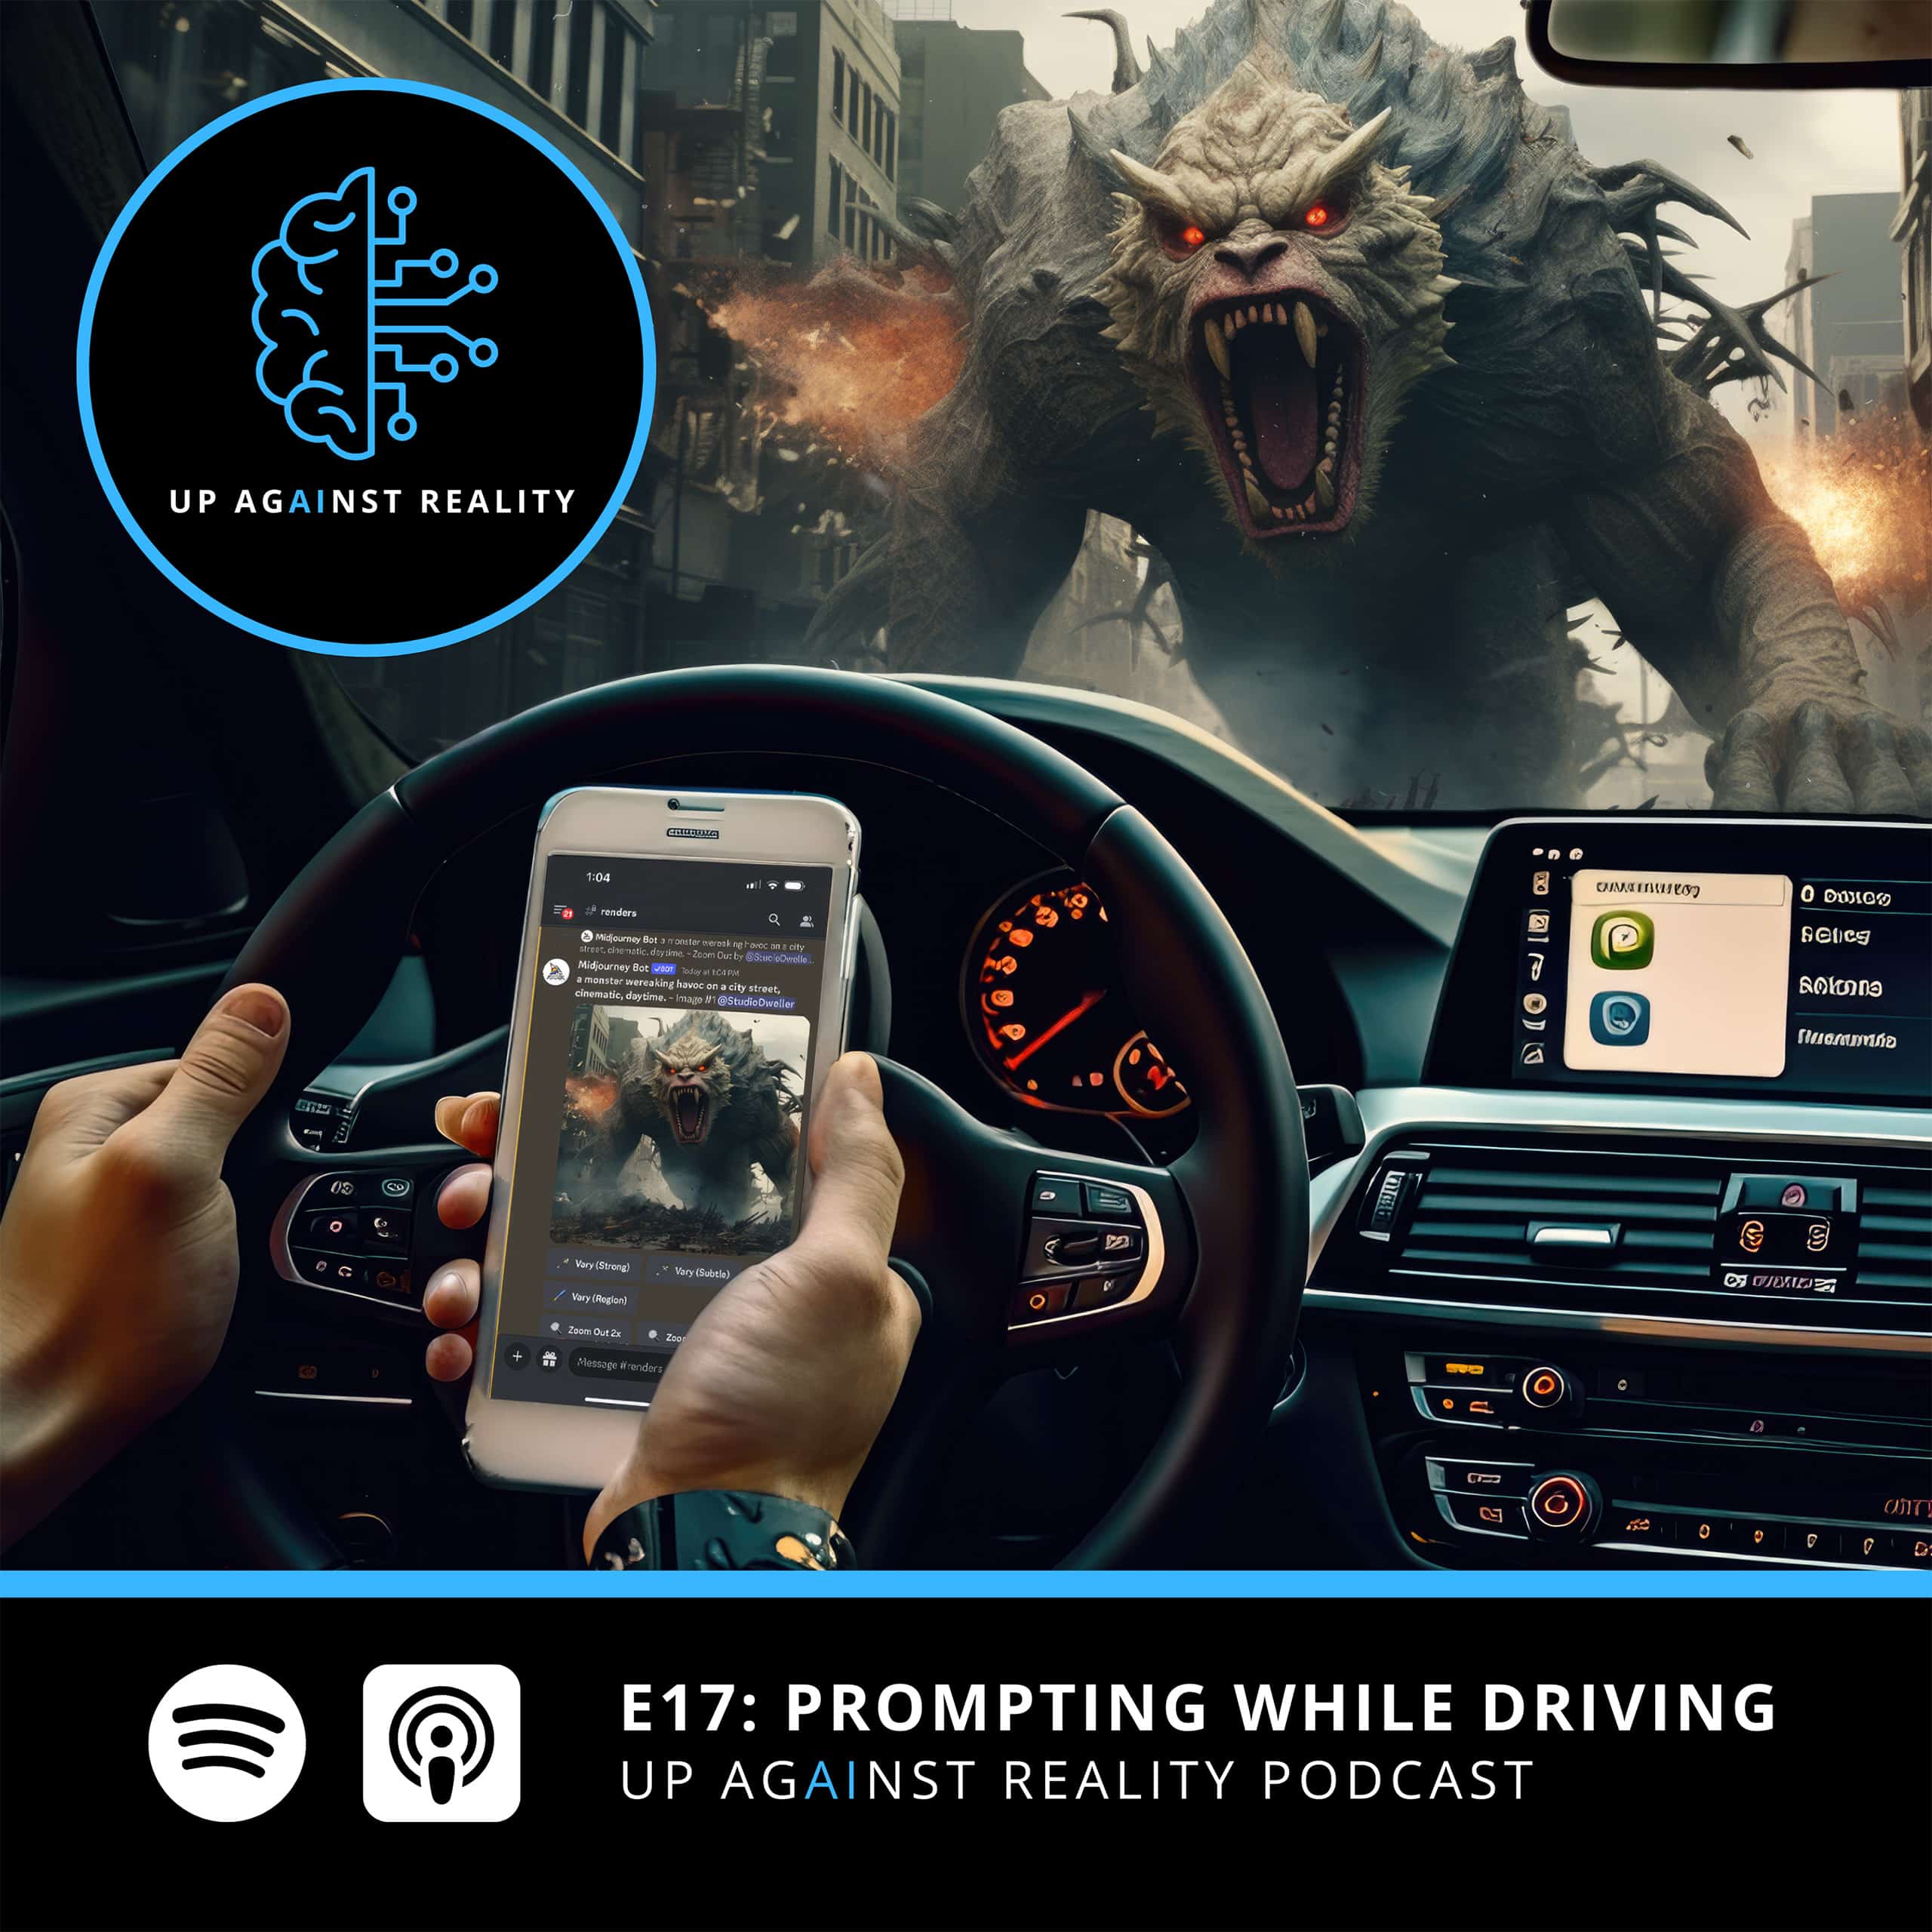 E17: Prompting While Driving